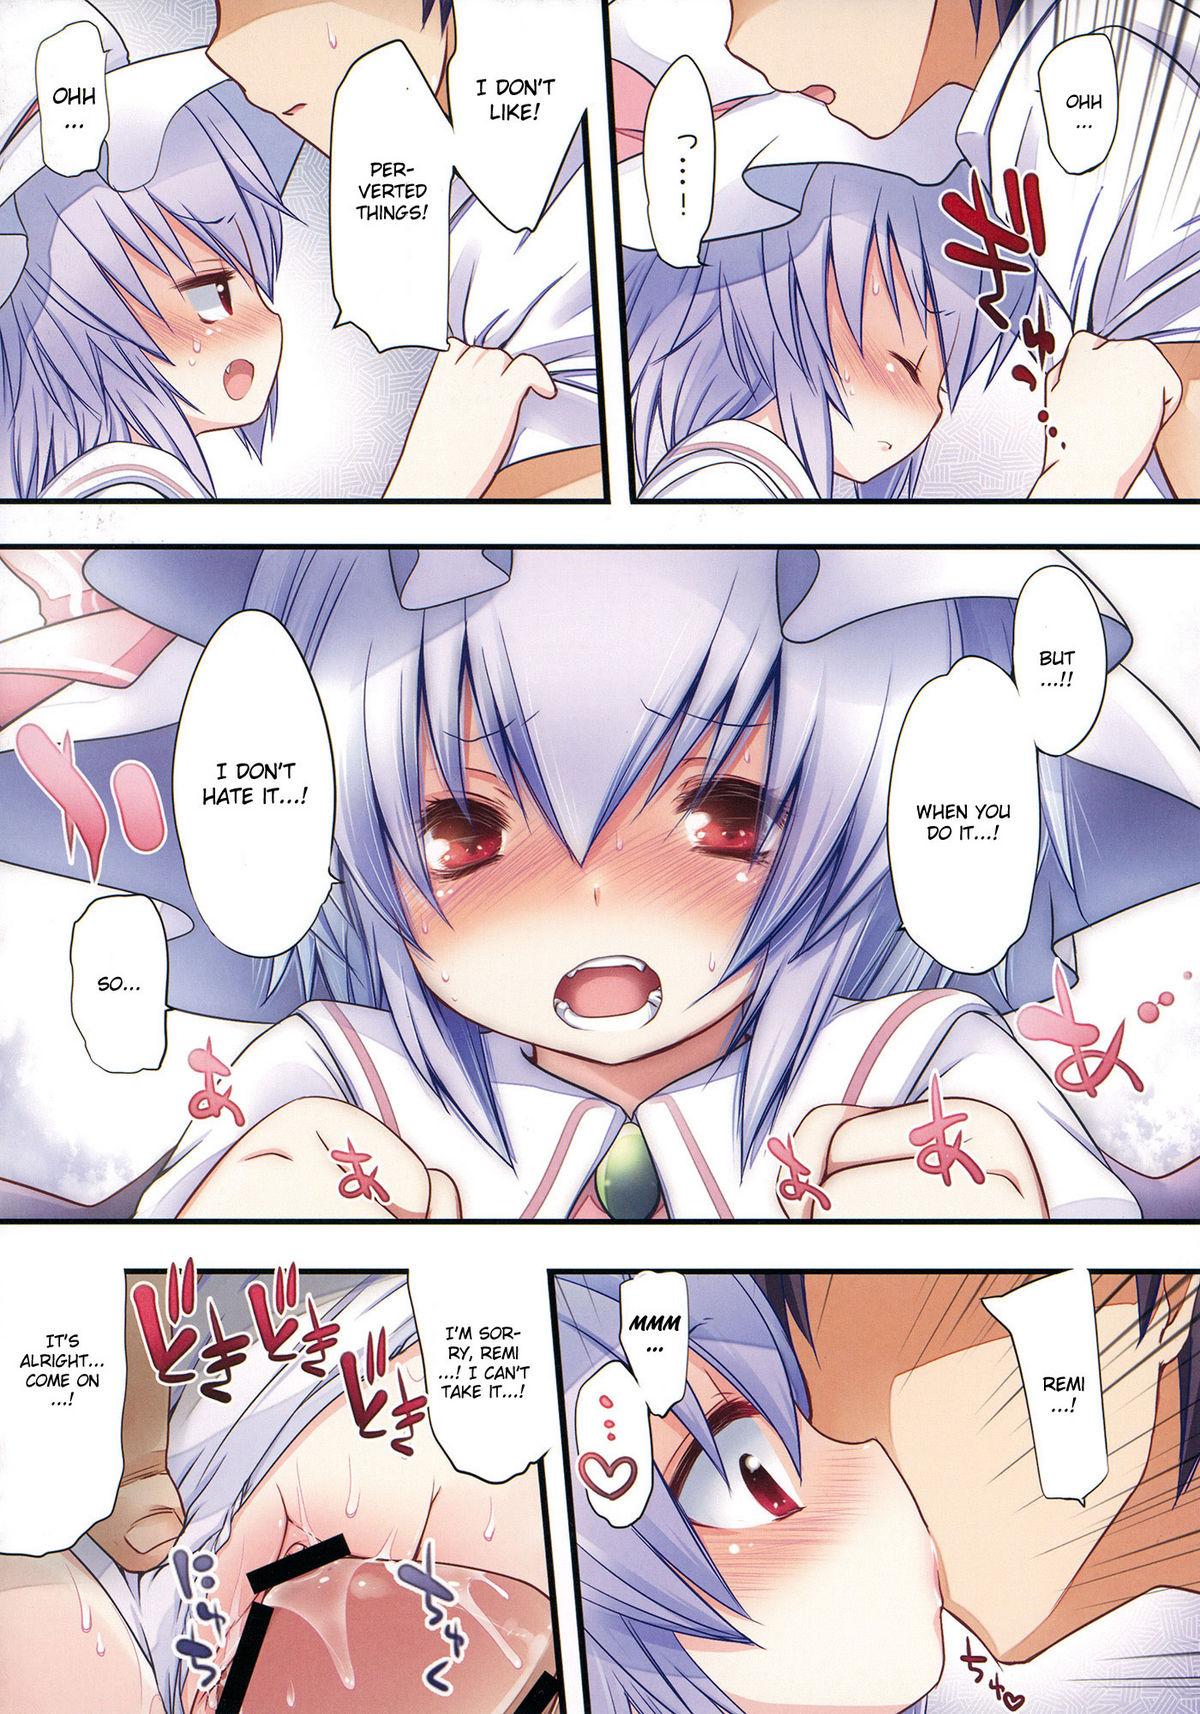 Menage Pedoria!! Tinkle scarlet R - Touhou project Big breasts - Page 11